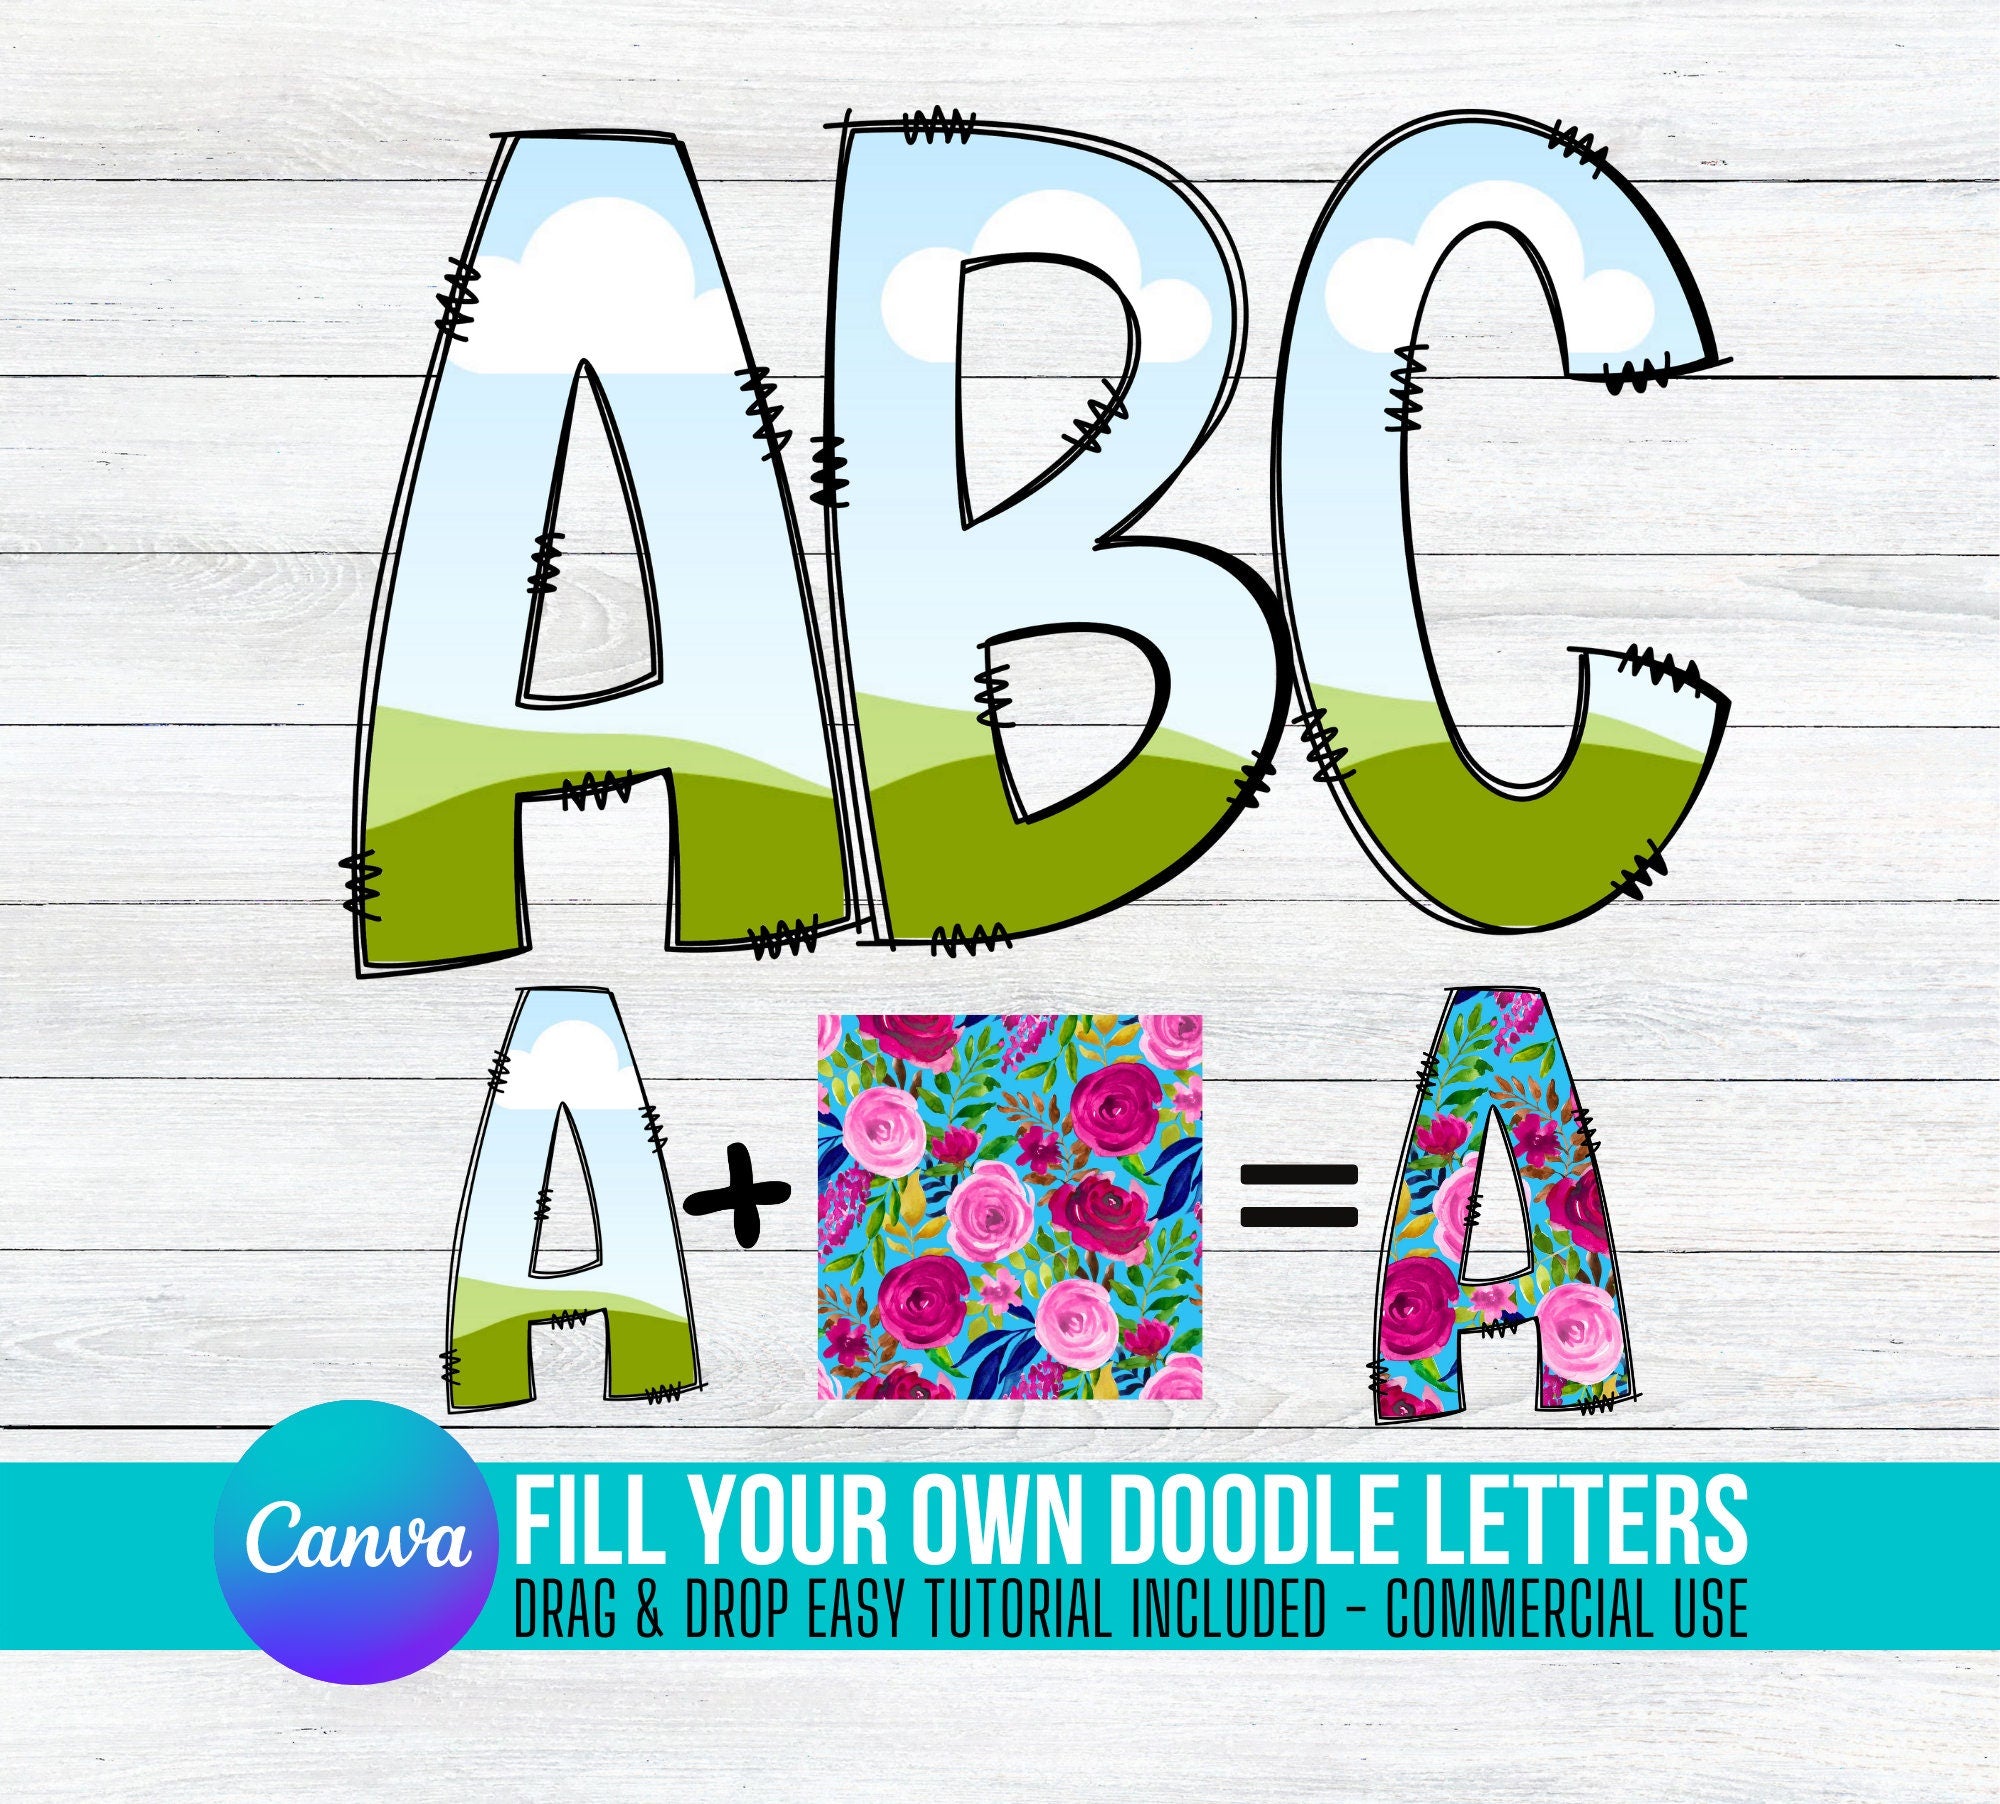 Fill your own Doodle Letters on CANVA with Commercial Use Allowed. Dra ...